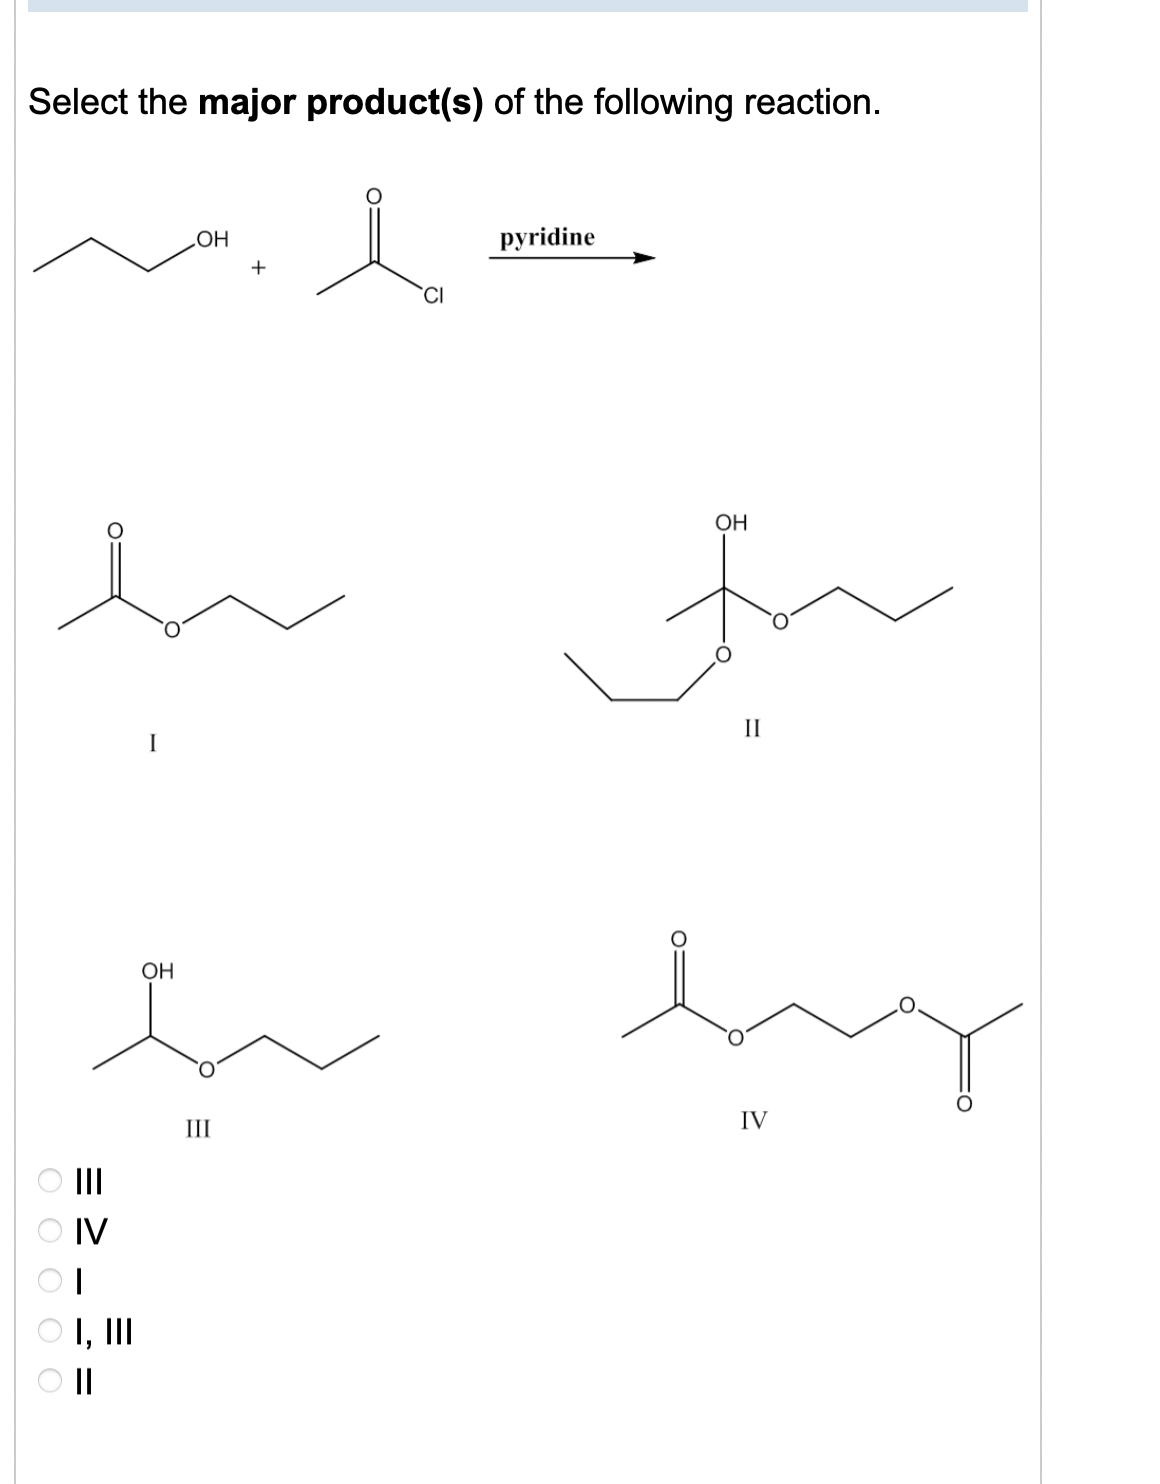 Select the major product(s) of the following reaction.
O O O O O
|||
OH
bo
III
OIV
OH
سک سند
I, III
+
O II
CI
pyridine
OH
II
by